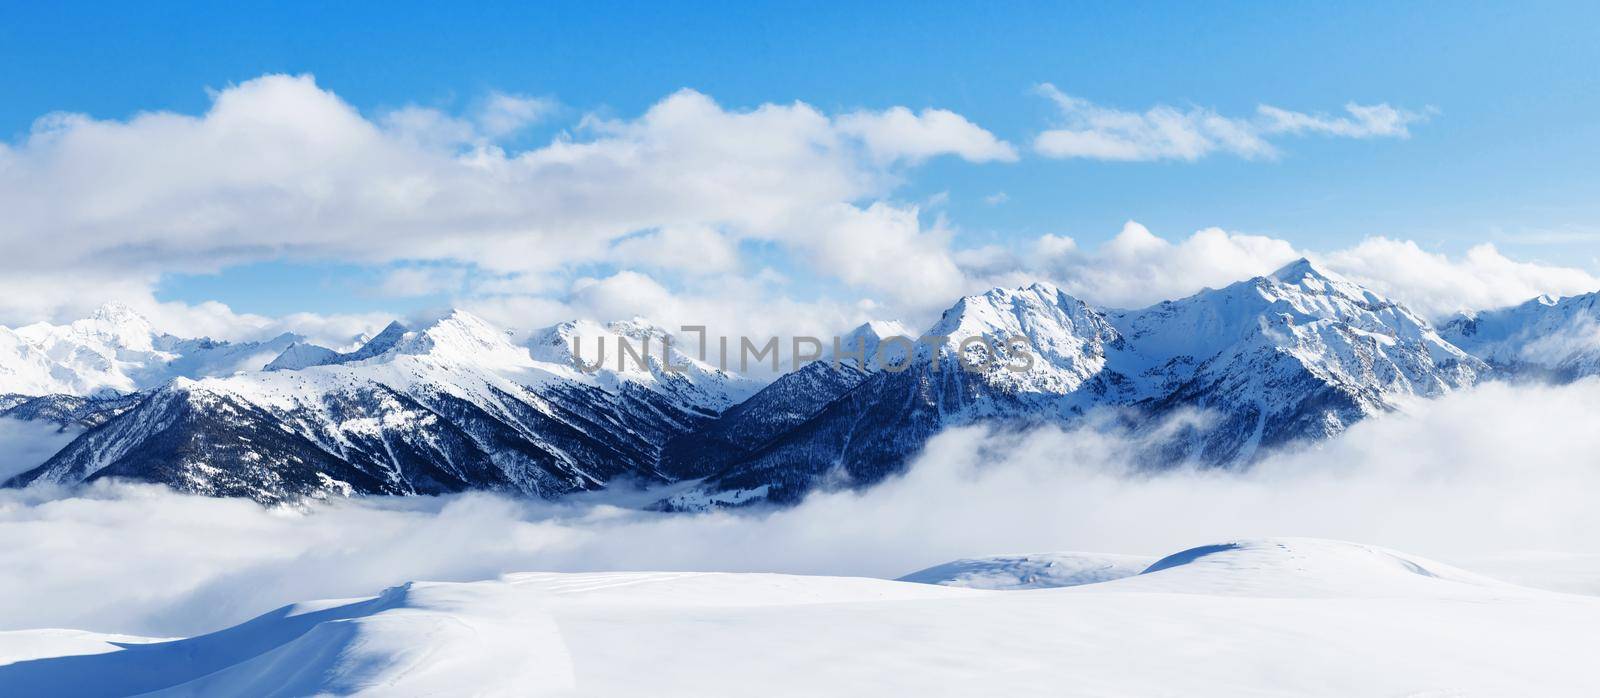 Panoramic view of mountains near Brianson, Serre Chevalier resort, France. Ski resort landscape on clear sunny day. Mountain ski resort. Snow slope. Snowy mountains. Winter vacation. Panorama. by photolime